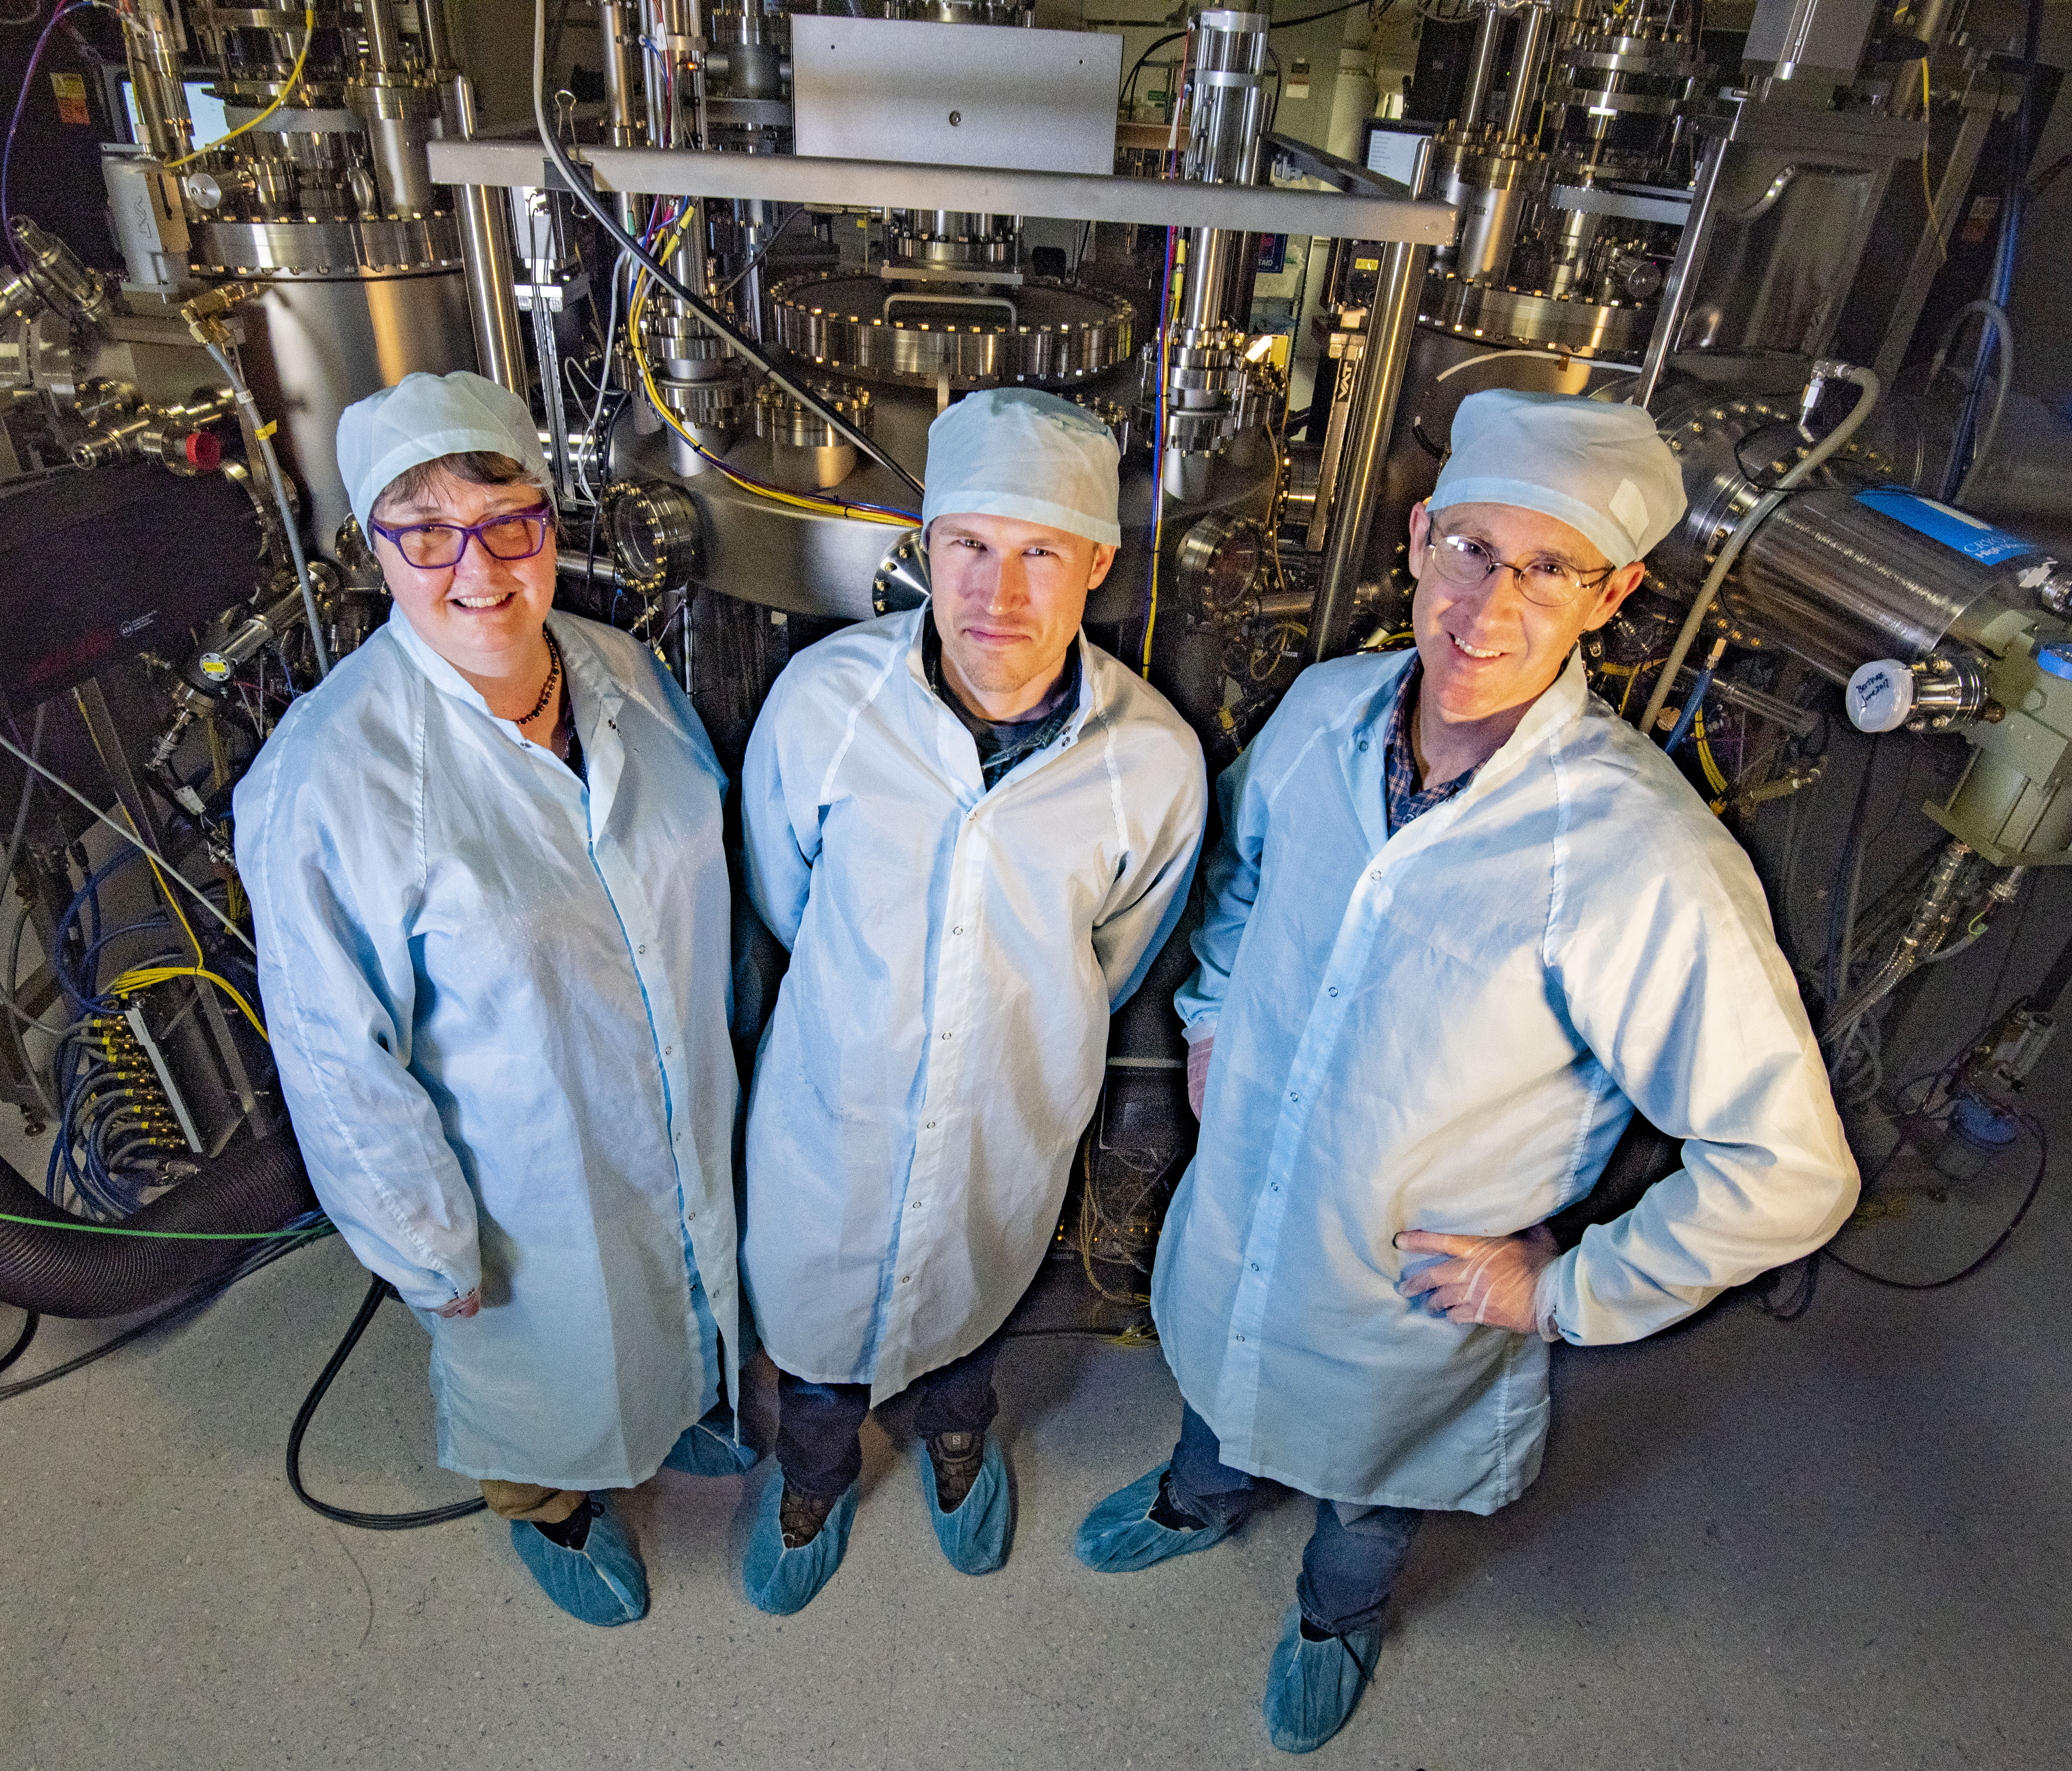 Three people in protective coats and caps pose in front of a large machine with circular parts and connecting hoses.